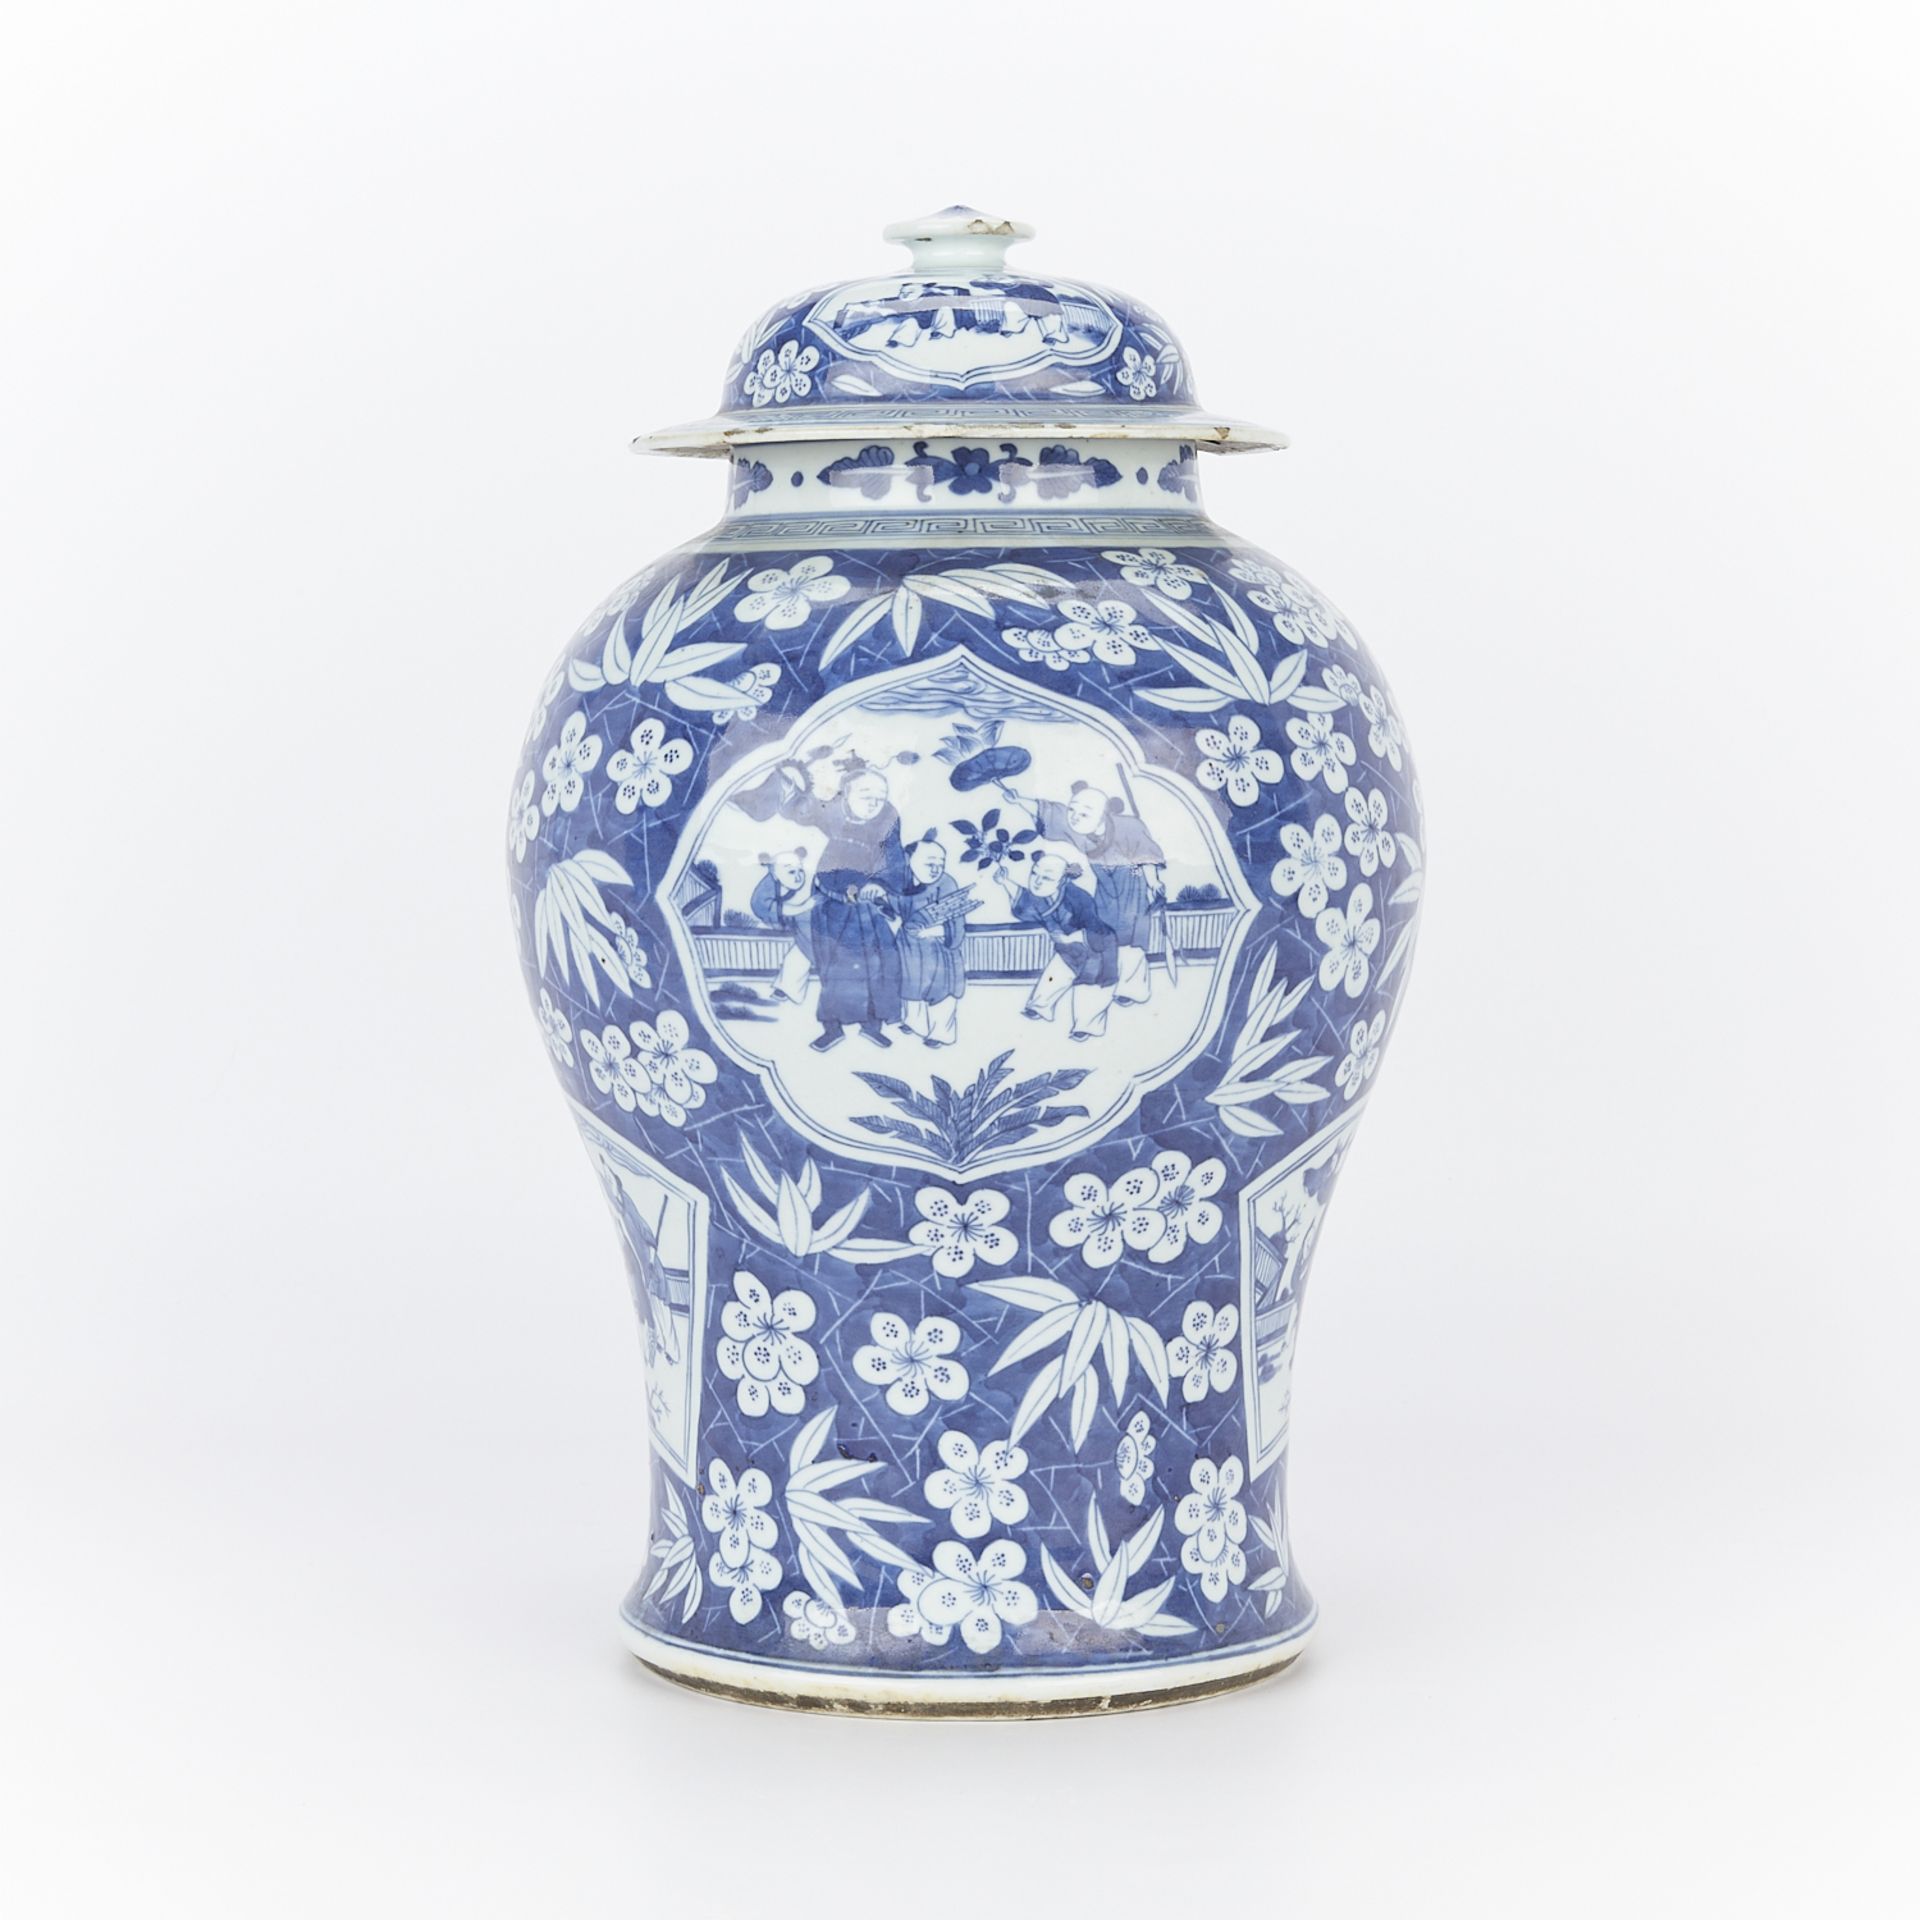 18th/19th c. Chinese B&W Porcelain Baluster Vase - Image 3 of 15